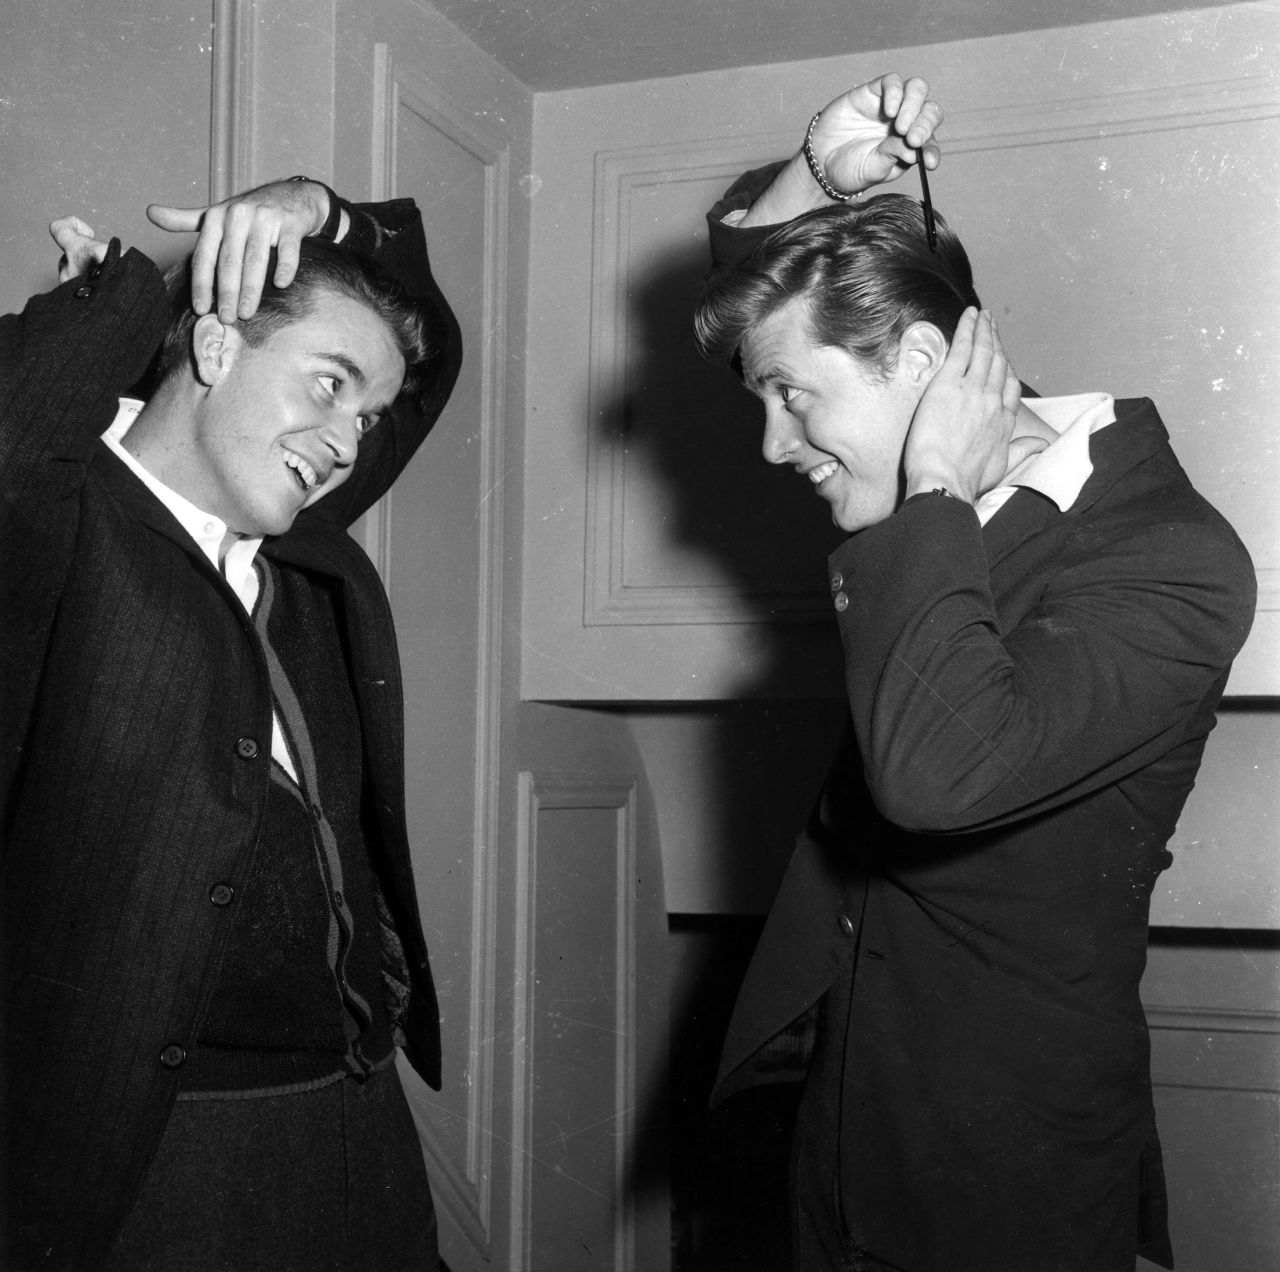 Clark, pictured with Edd Byrnes, hosted "American Bandstand," from 1956 until 1987.